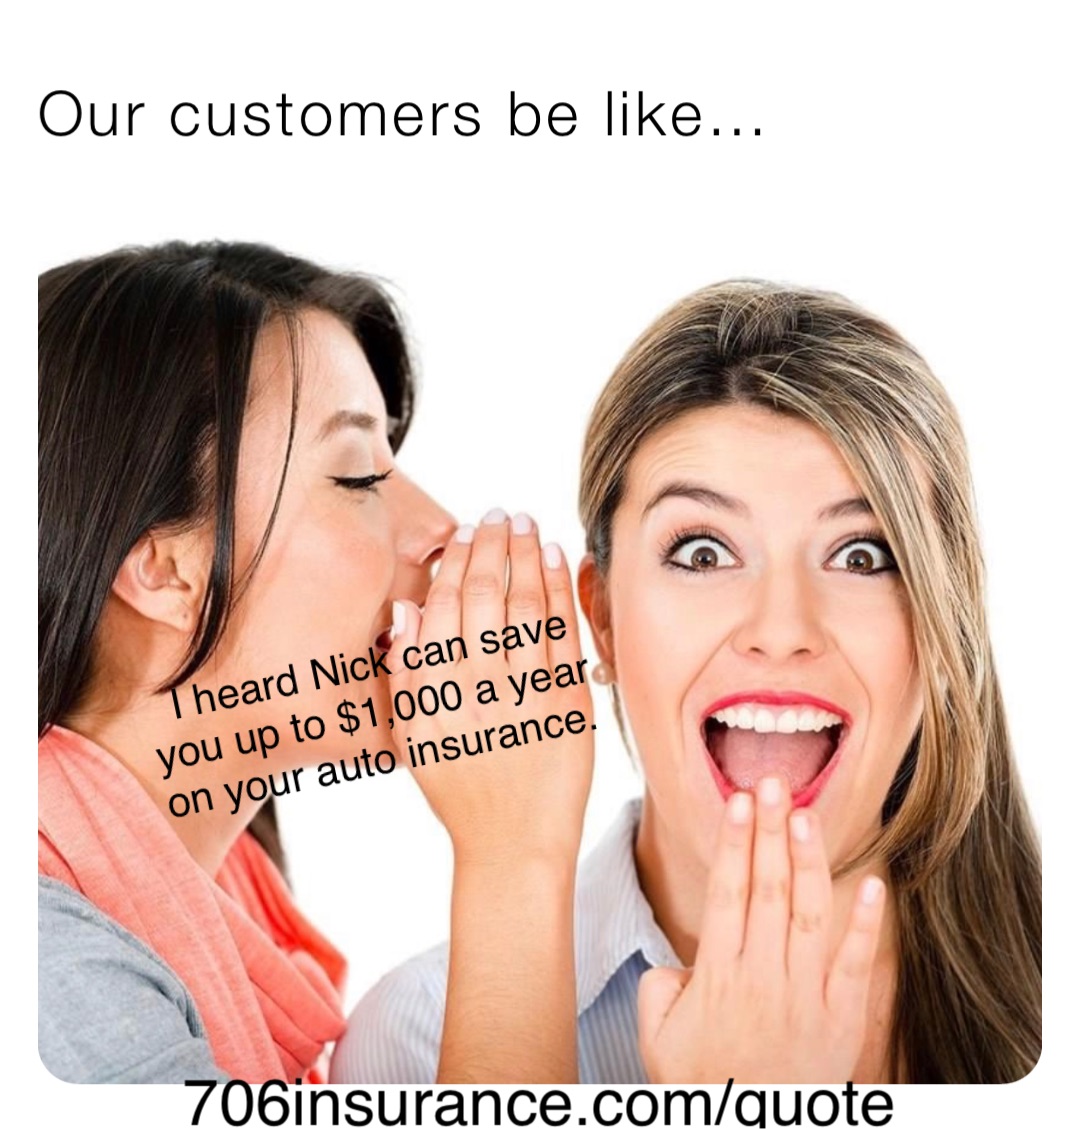 Our customers be like… I heard Nick can save you up to $1,000 a year on your auto insurance. 706insurance.com/quote